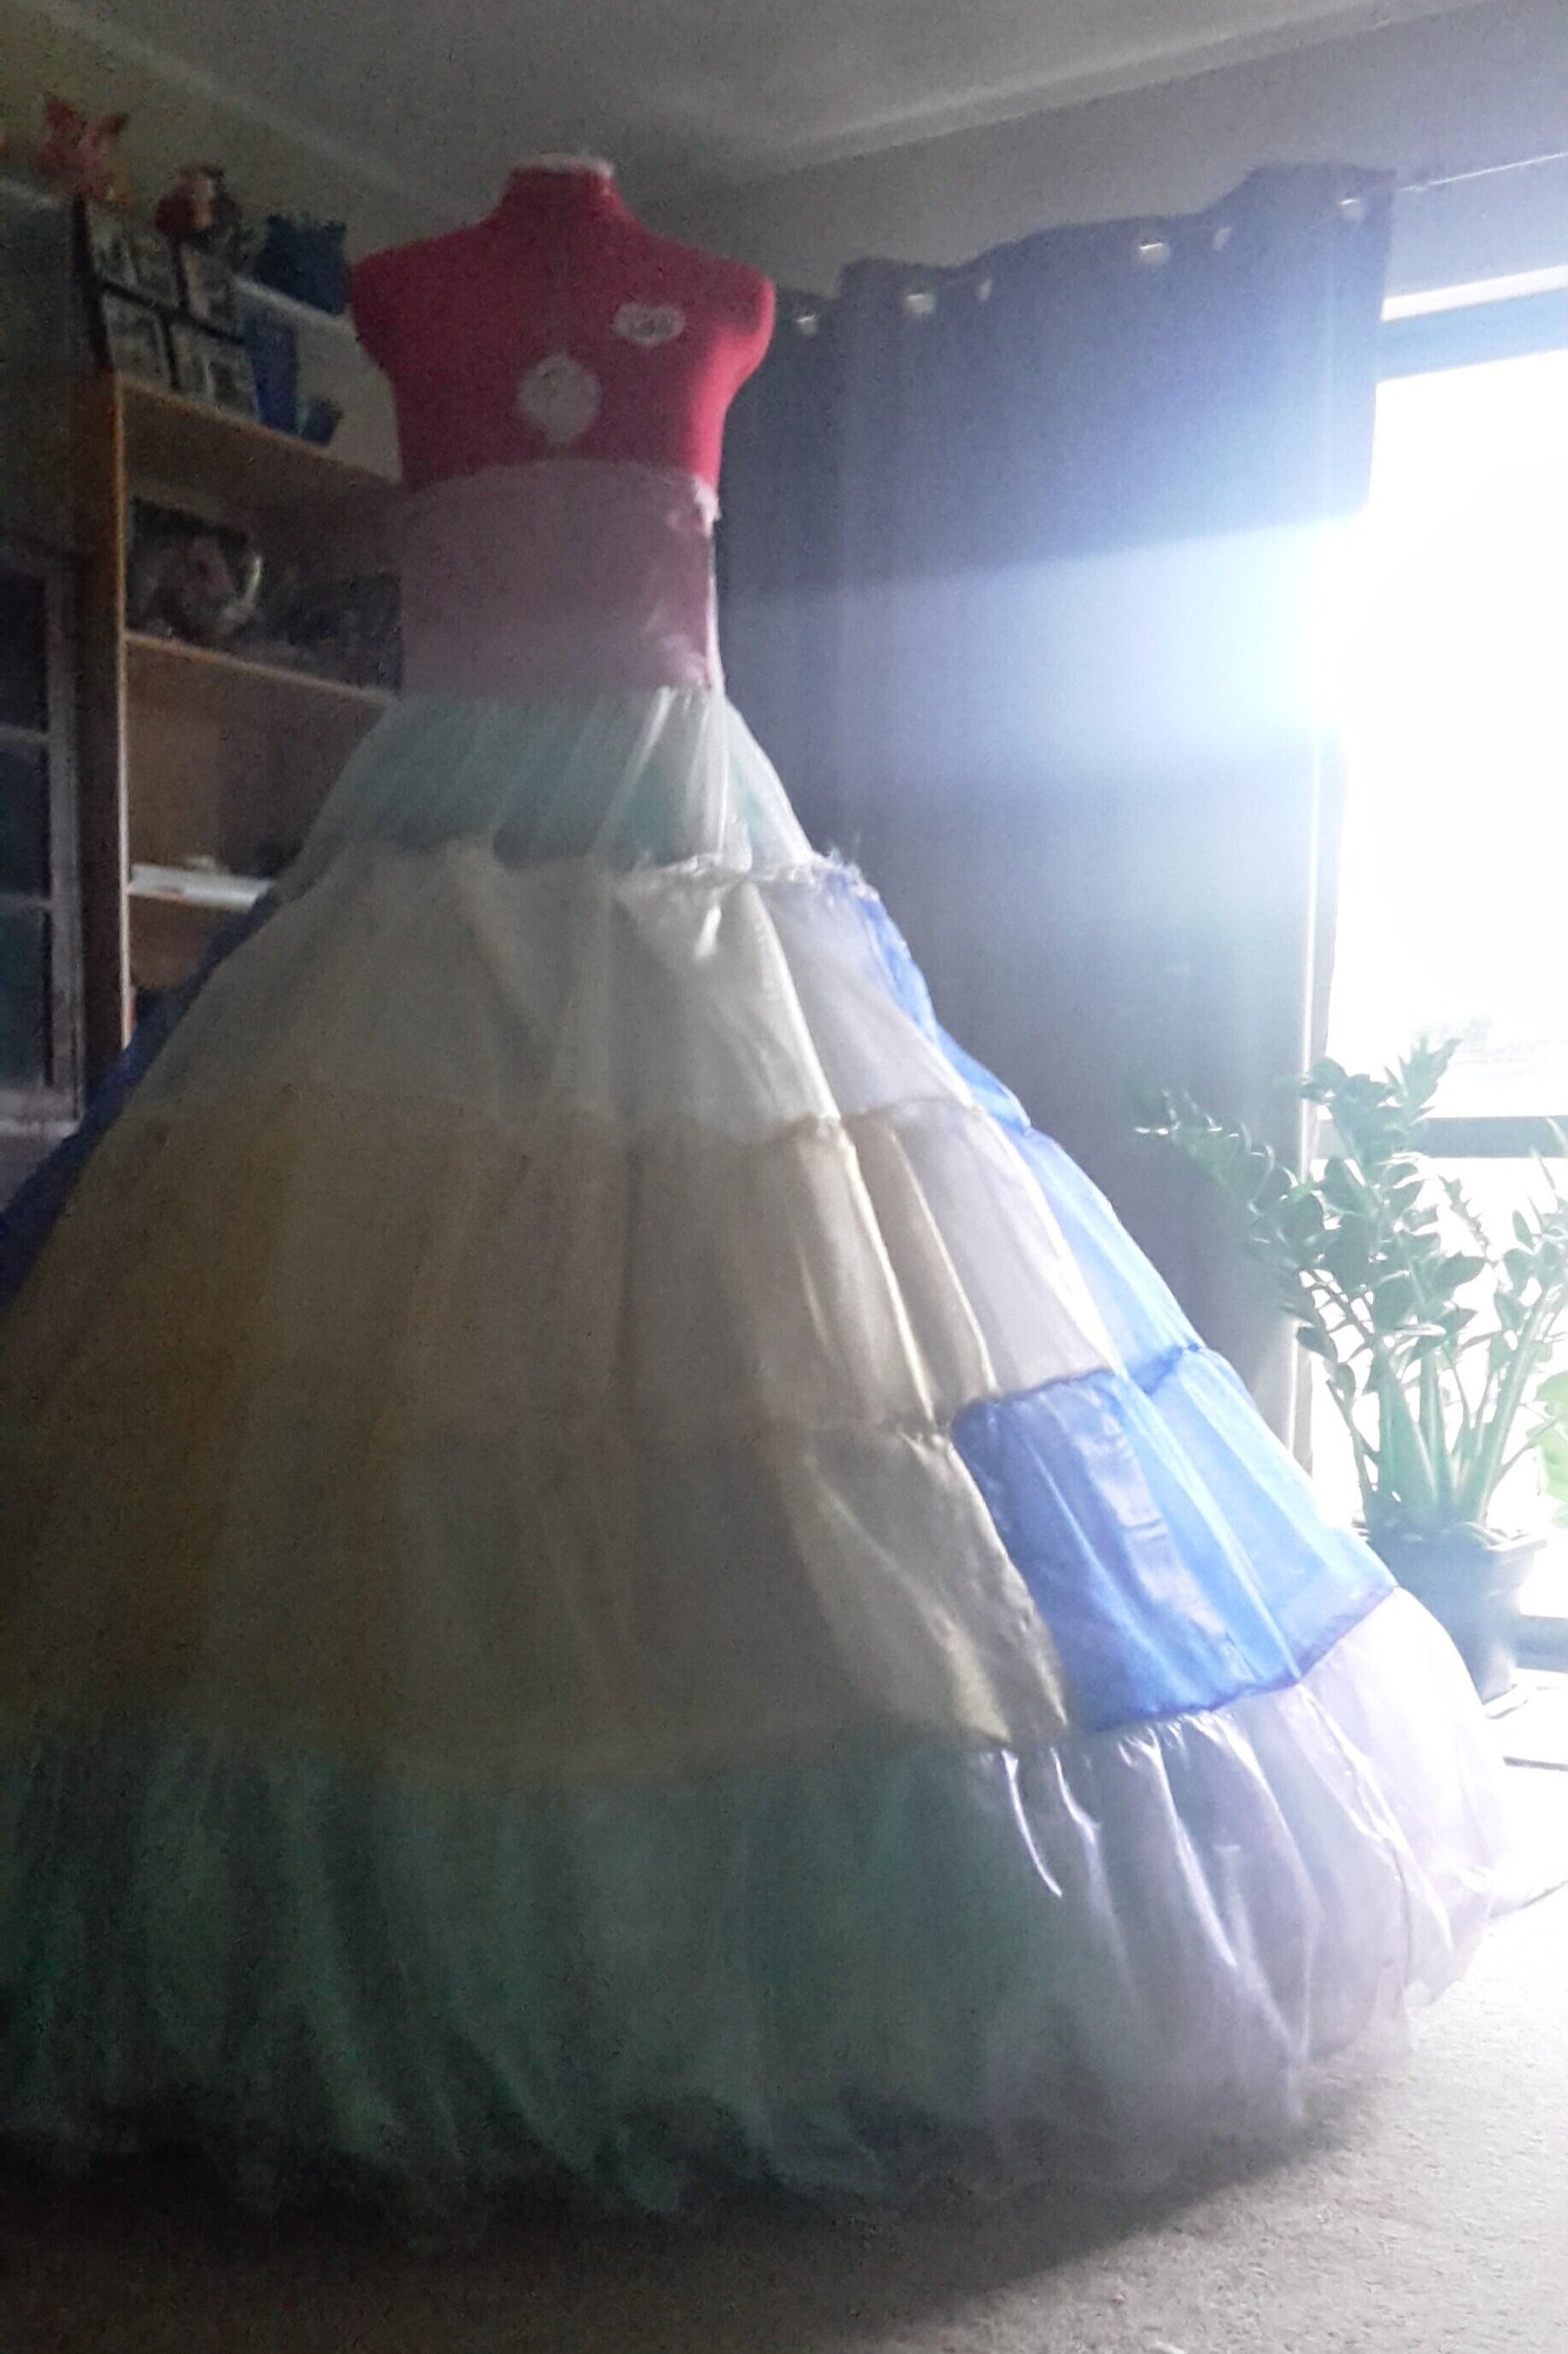 Almost finished with the Petticoats